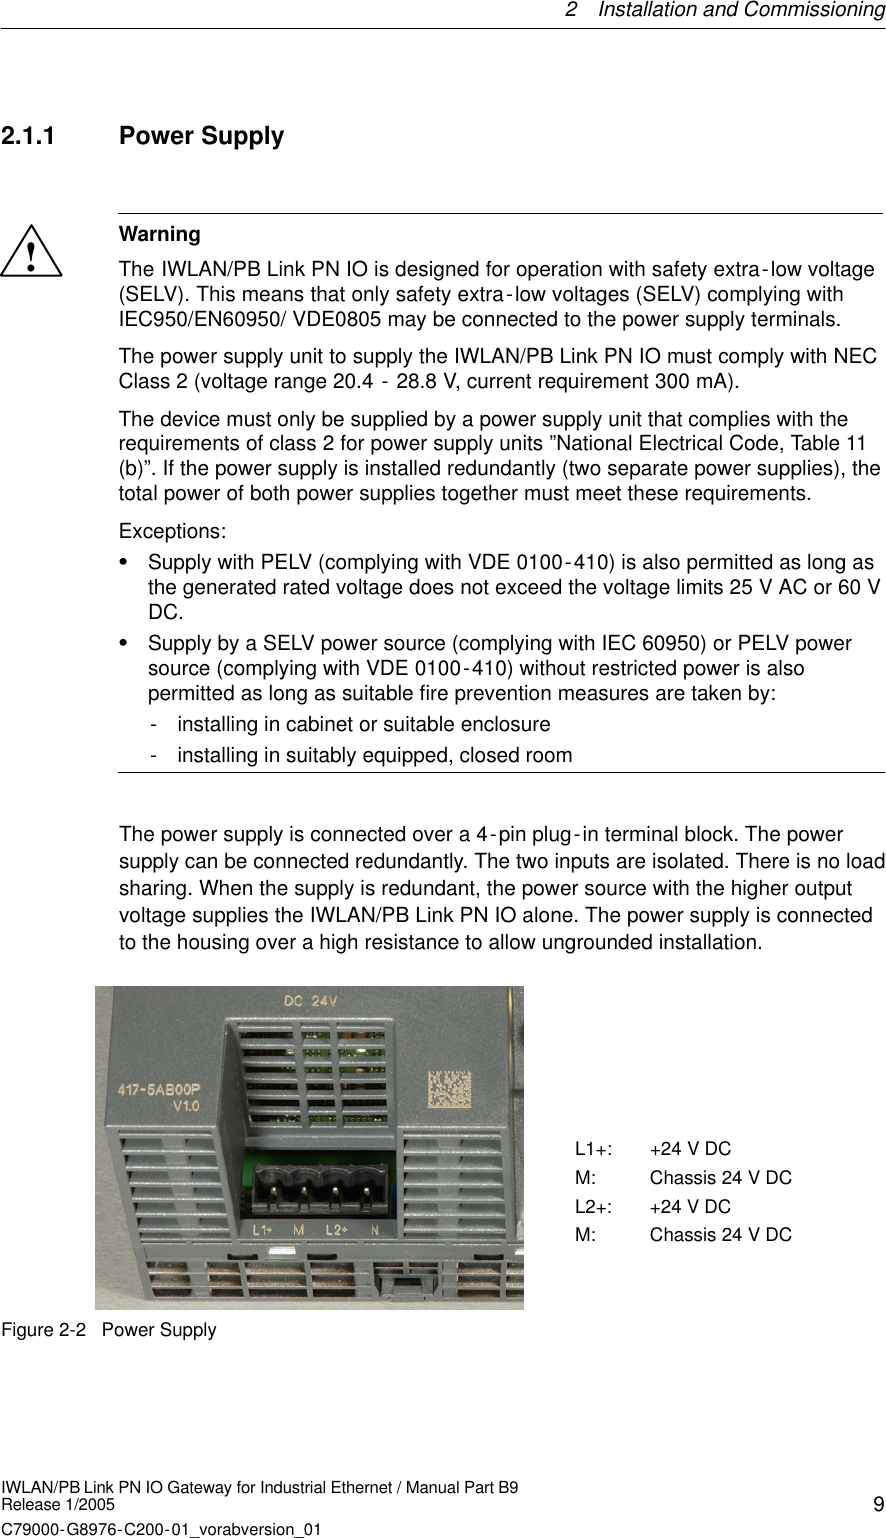 2 Installation and Commissioning9IWLAN/PB Link PN IO Gateway for Industrial Ethernet / Manual Part B9Release 1/2005C79000-G8976-C200-01_vorabversion_012.1.1 Power Supply !WarningThe IWLAN/PB Link PN IO is designed for operation with safety extra-low voltage(SELV). This means that only safety extra-low voltages (SELV) complying withIEC950/EN60950/ VDE0805 may be connected to the power supply terminals. The power supply unit to supply the IWLAN/PB Link PN IO must comply with NECClass 2 (voltage range 20.4 - 28.8 V, current requirement 300 mA).The device must only be supplied by a power supply unit that complies with therequirements of class 2 for power supply units ”National Electrical Code, Table 11(b)”. If the power supply is installed redundantly (two separate power supplies), thetotal power of both power supplies together must meet these requirements.Exceptions:SSupply with PELV (complying with VDE 0100-410) is also permitted as long asthe generated rated voltage does not exceed the voltage limits 25 V AC or 60 VDC.SSupply by a SELV power source (complying with IEC 60950) or PELV powersource (complying with VDE 0100-410) without restricted power is alsopermitted as long as suitable fire prevention measures are taken by:- installing in cabinet or suitable enclosure- installing in suitably equipped, closed roomThe power supply is connected over a 4-pin plug-in terminal block. The powersupply can be connected redundantly. The two inputs are isolated. There is no loadsharing. When the supply is redundant, the power source with the higher outputvoltage supplies the IWLAN/PB Link PN IO alone. The power supply is connectedto the housing over a high resistance to allow ungrounded installation.L1+: +24 V DCM: Chassis 24 V DCL2+: +24 V DCM: Chassis 24 V DCFigure 2-2 Power Supply